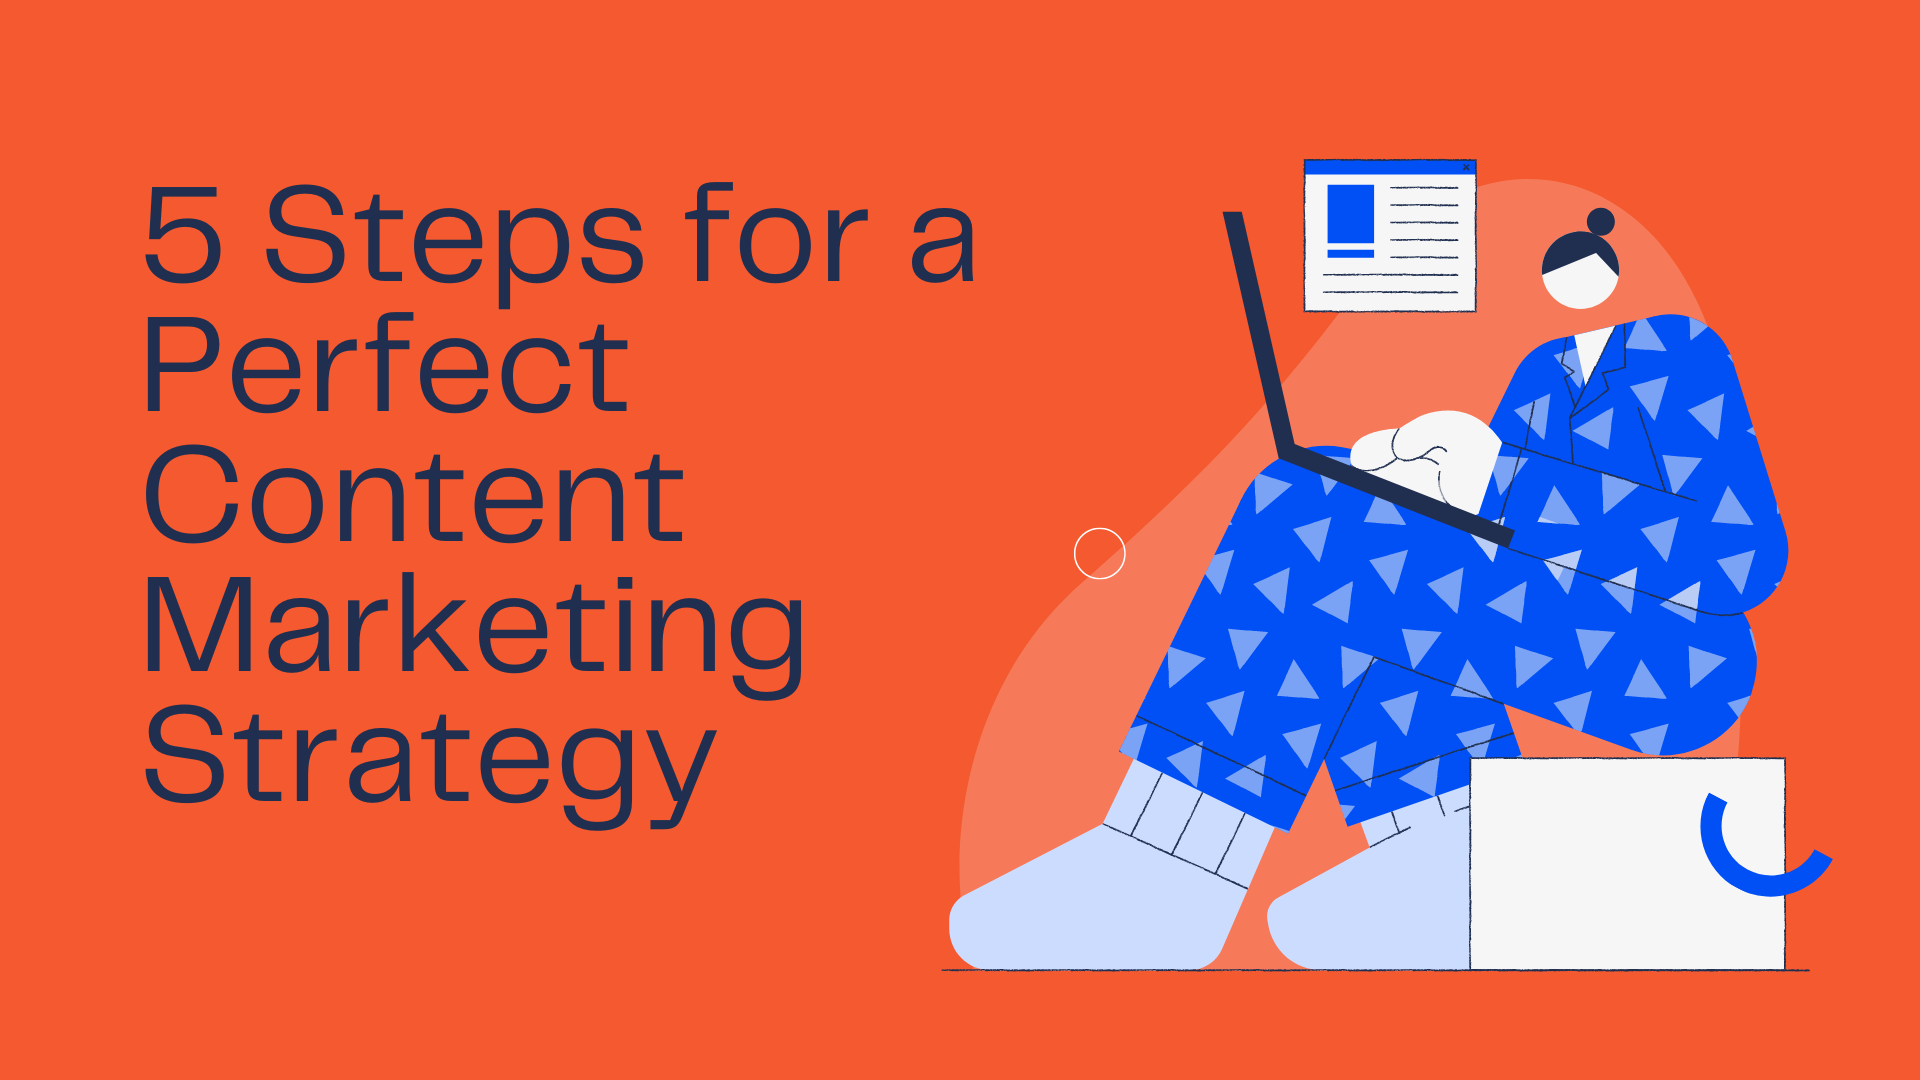 Steps for a Perfect Content Marketing Strategy